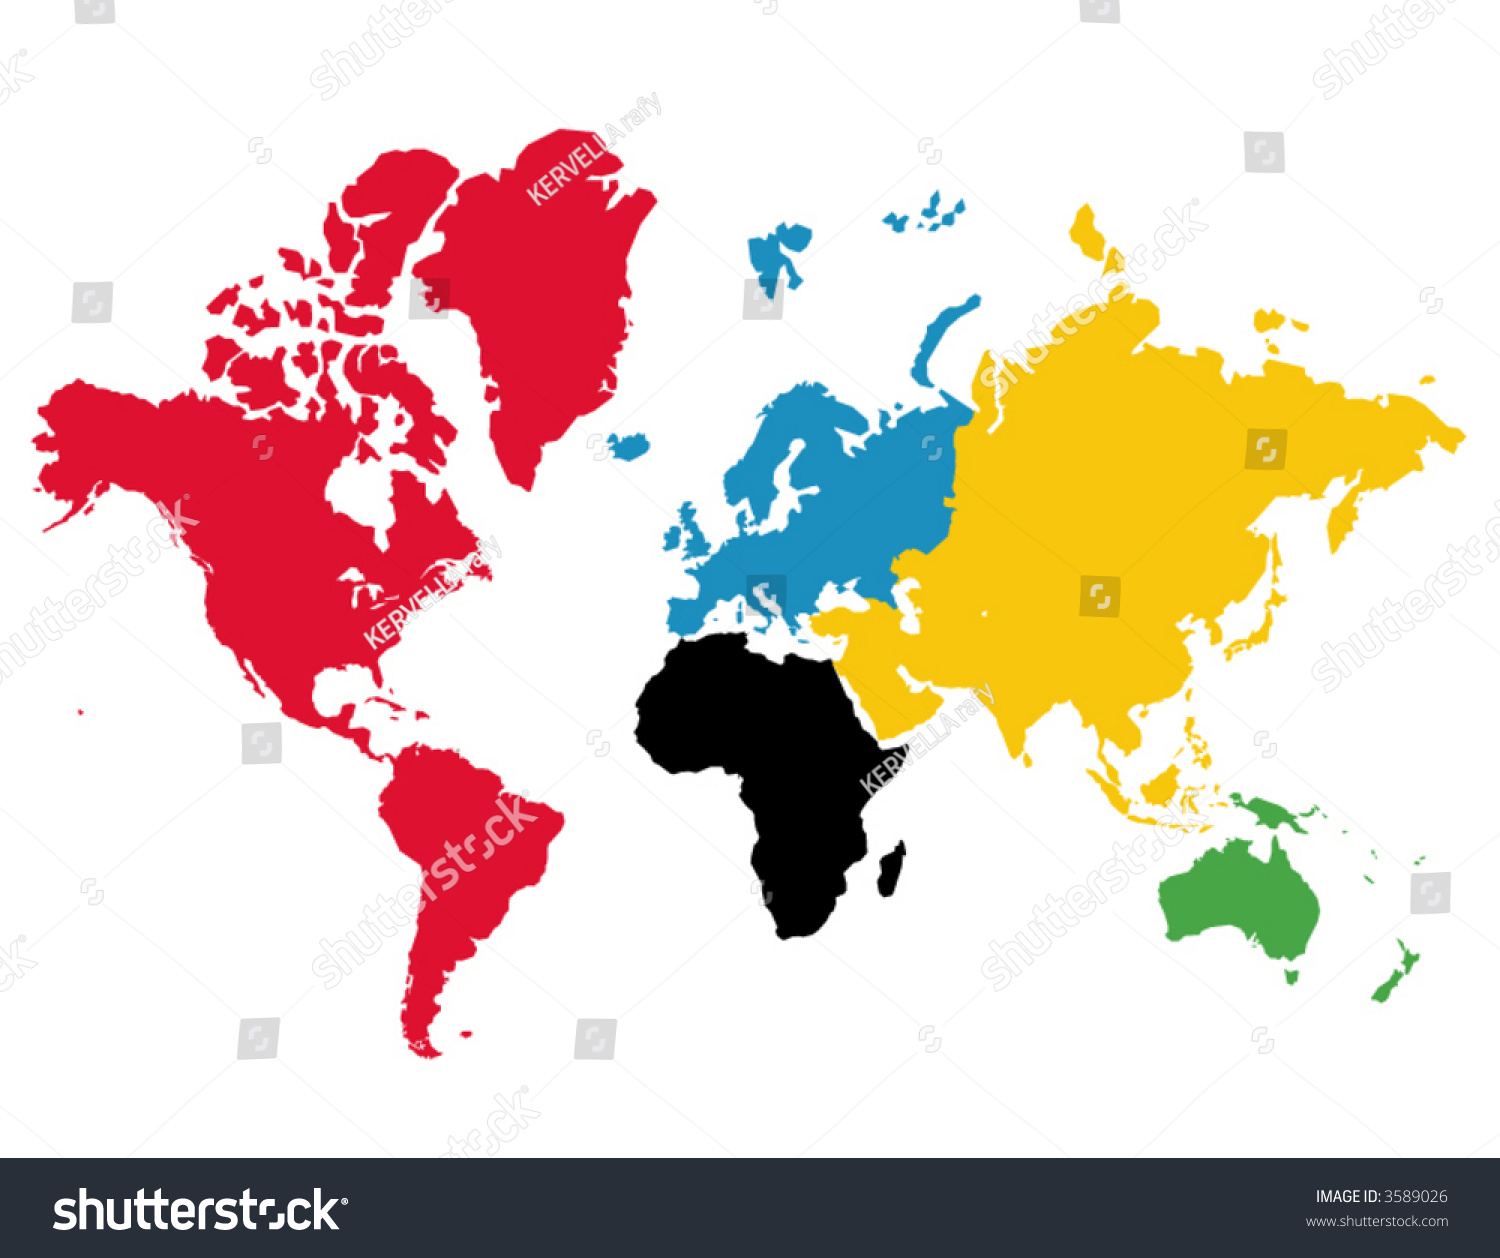 Olympic Games Colored Continents Vector Stock Vector 3589026 - Shutterstock